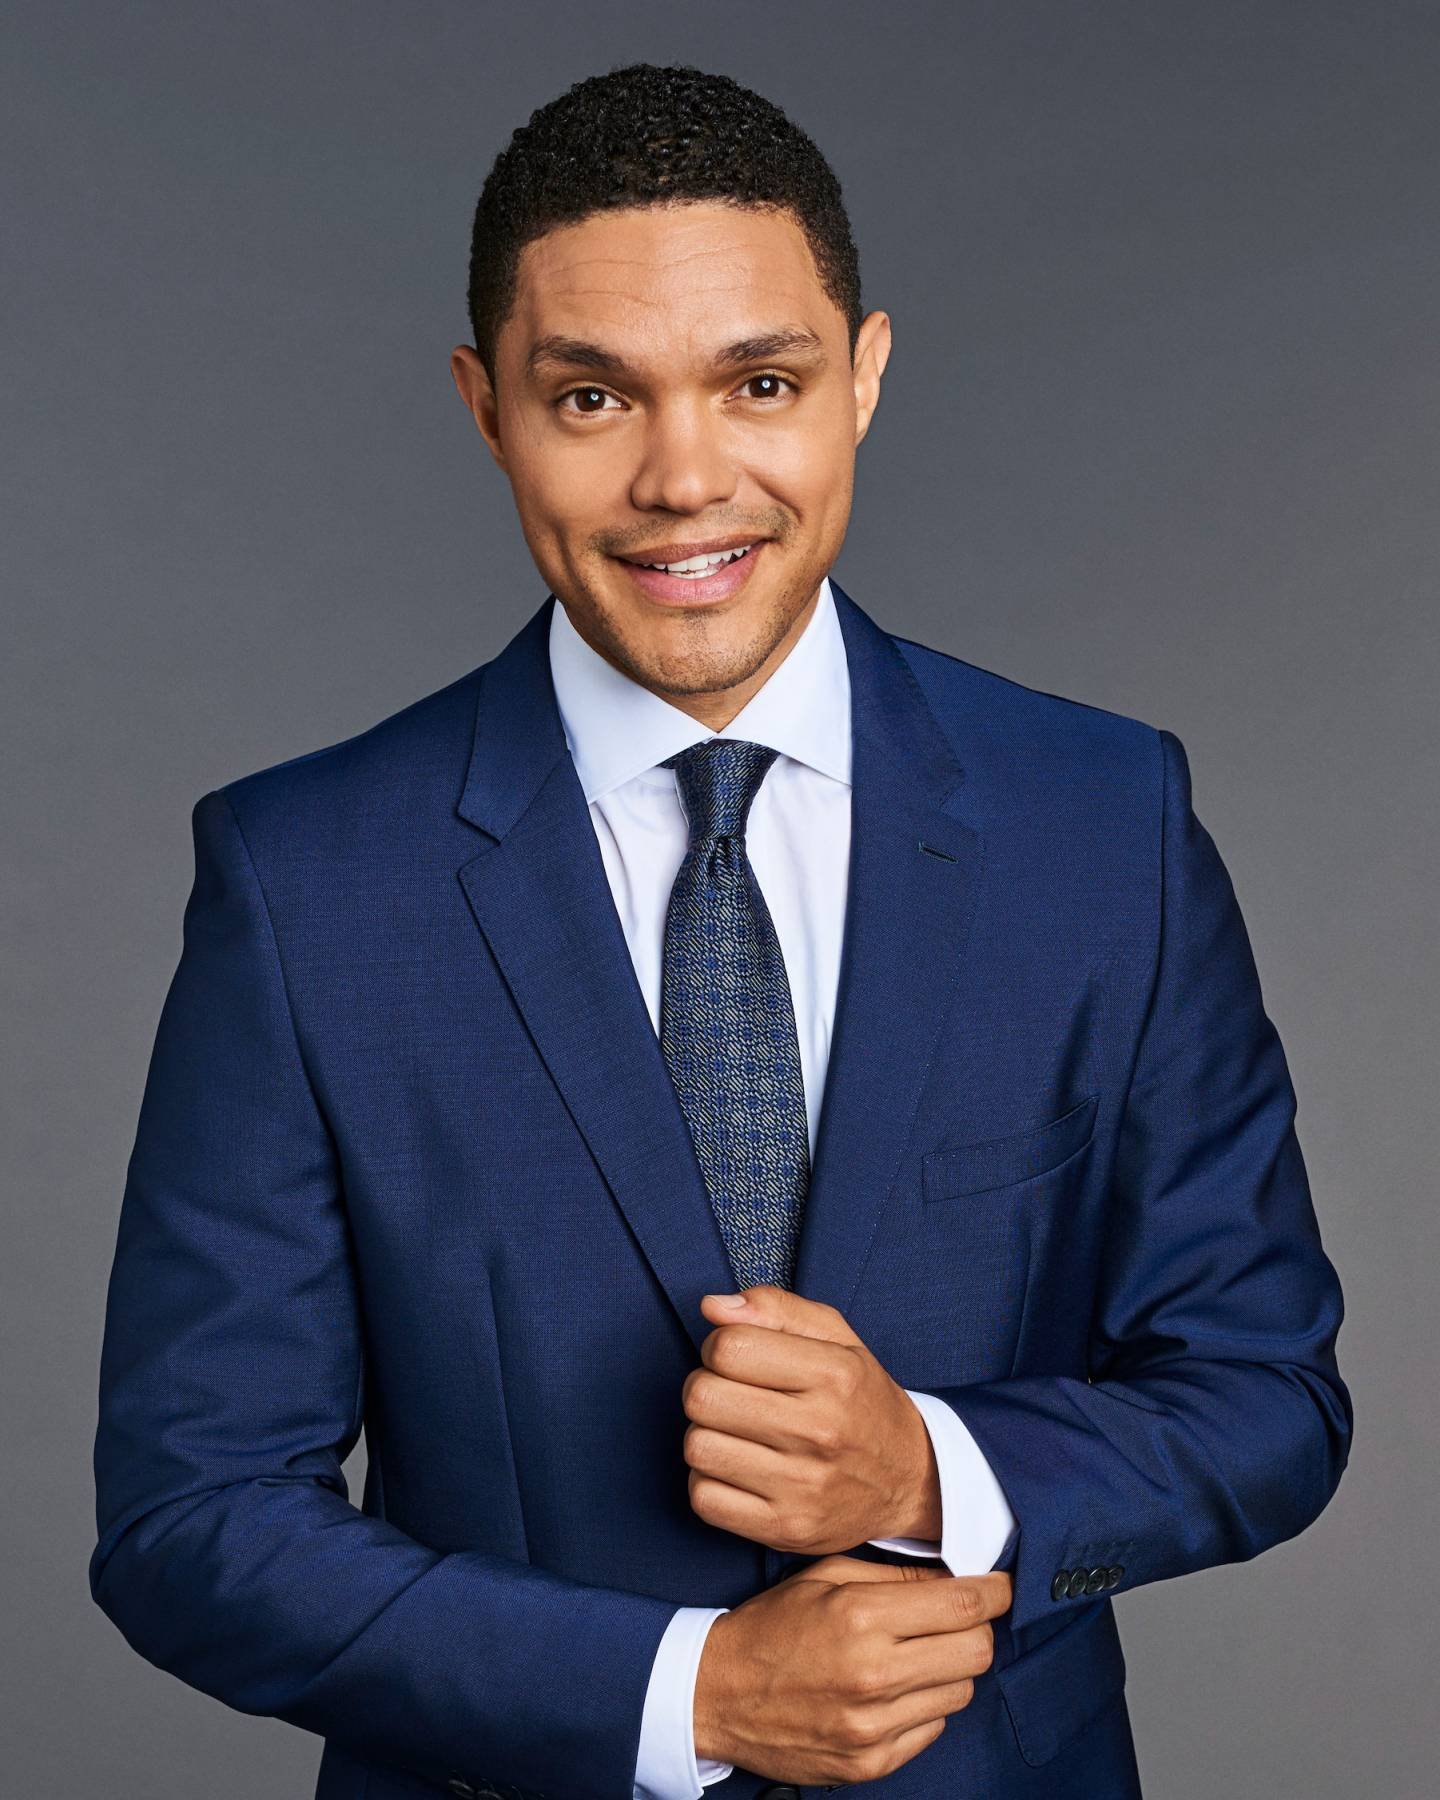 Mzansi Reacts To Trevor Noah’s Snub Of SA In His Upcoming Comedy ‘World Tour’